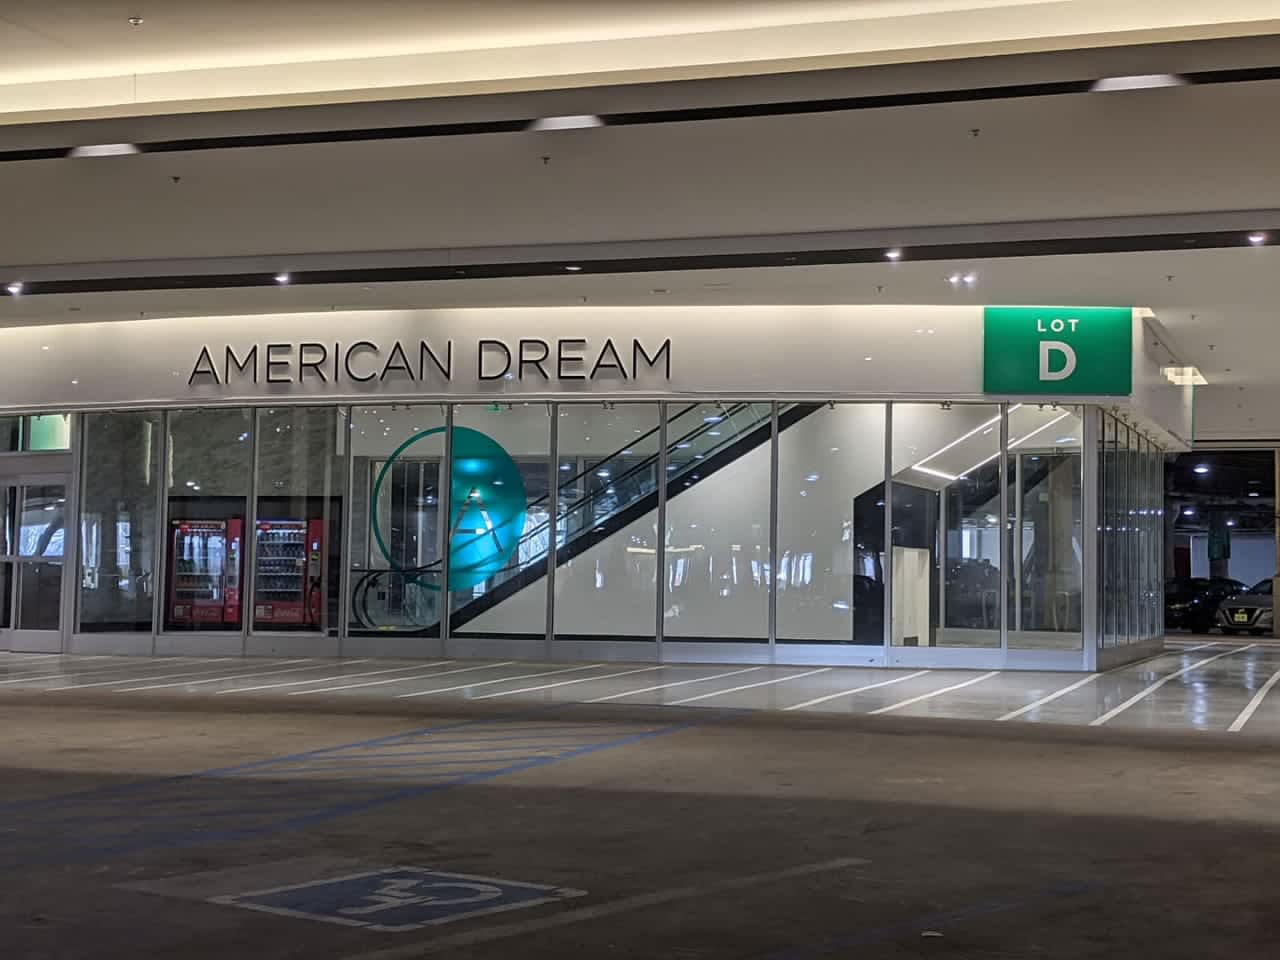 ANYONE who might have witnessed the incident at the American Dream Mall or has information that could help find those responsible is asked to contact the New Jersey State Police: (609) 882-2000.